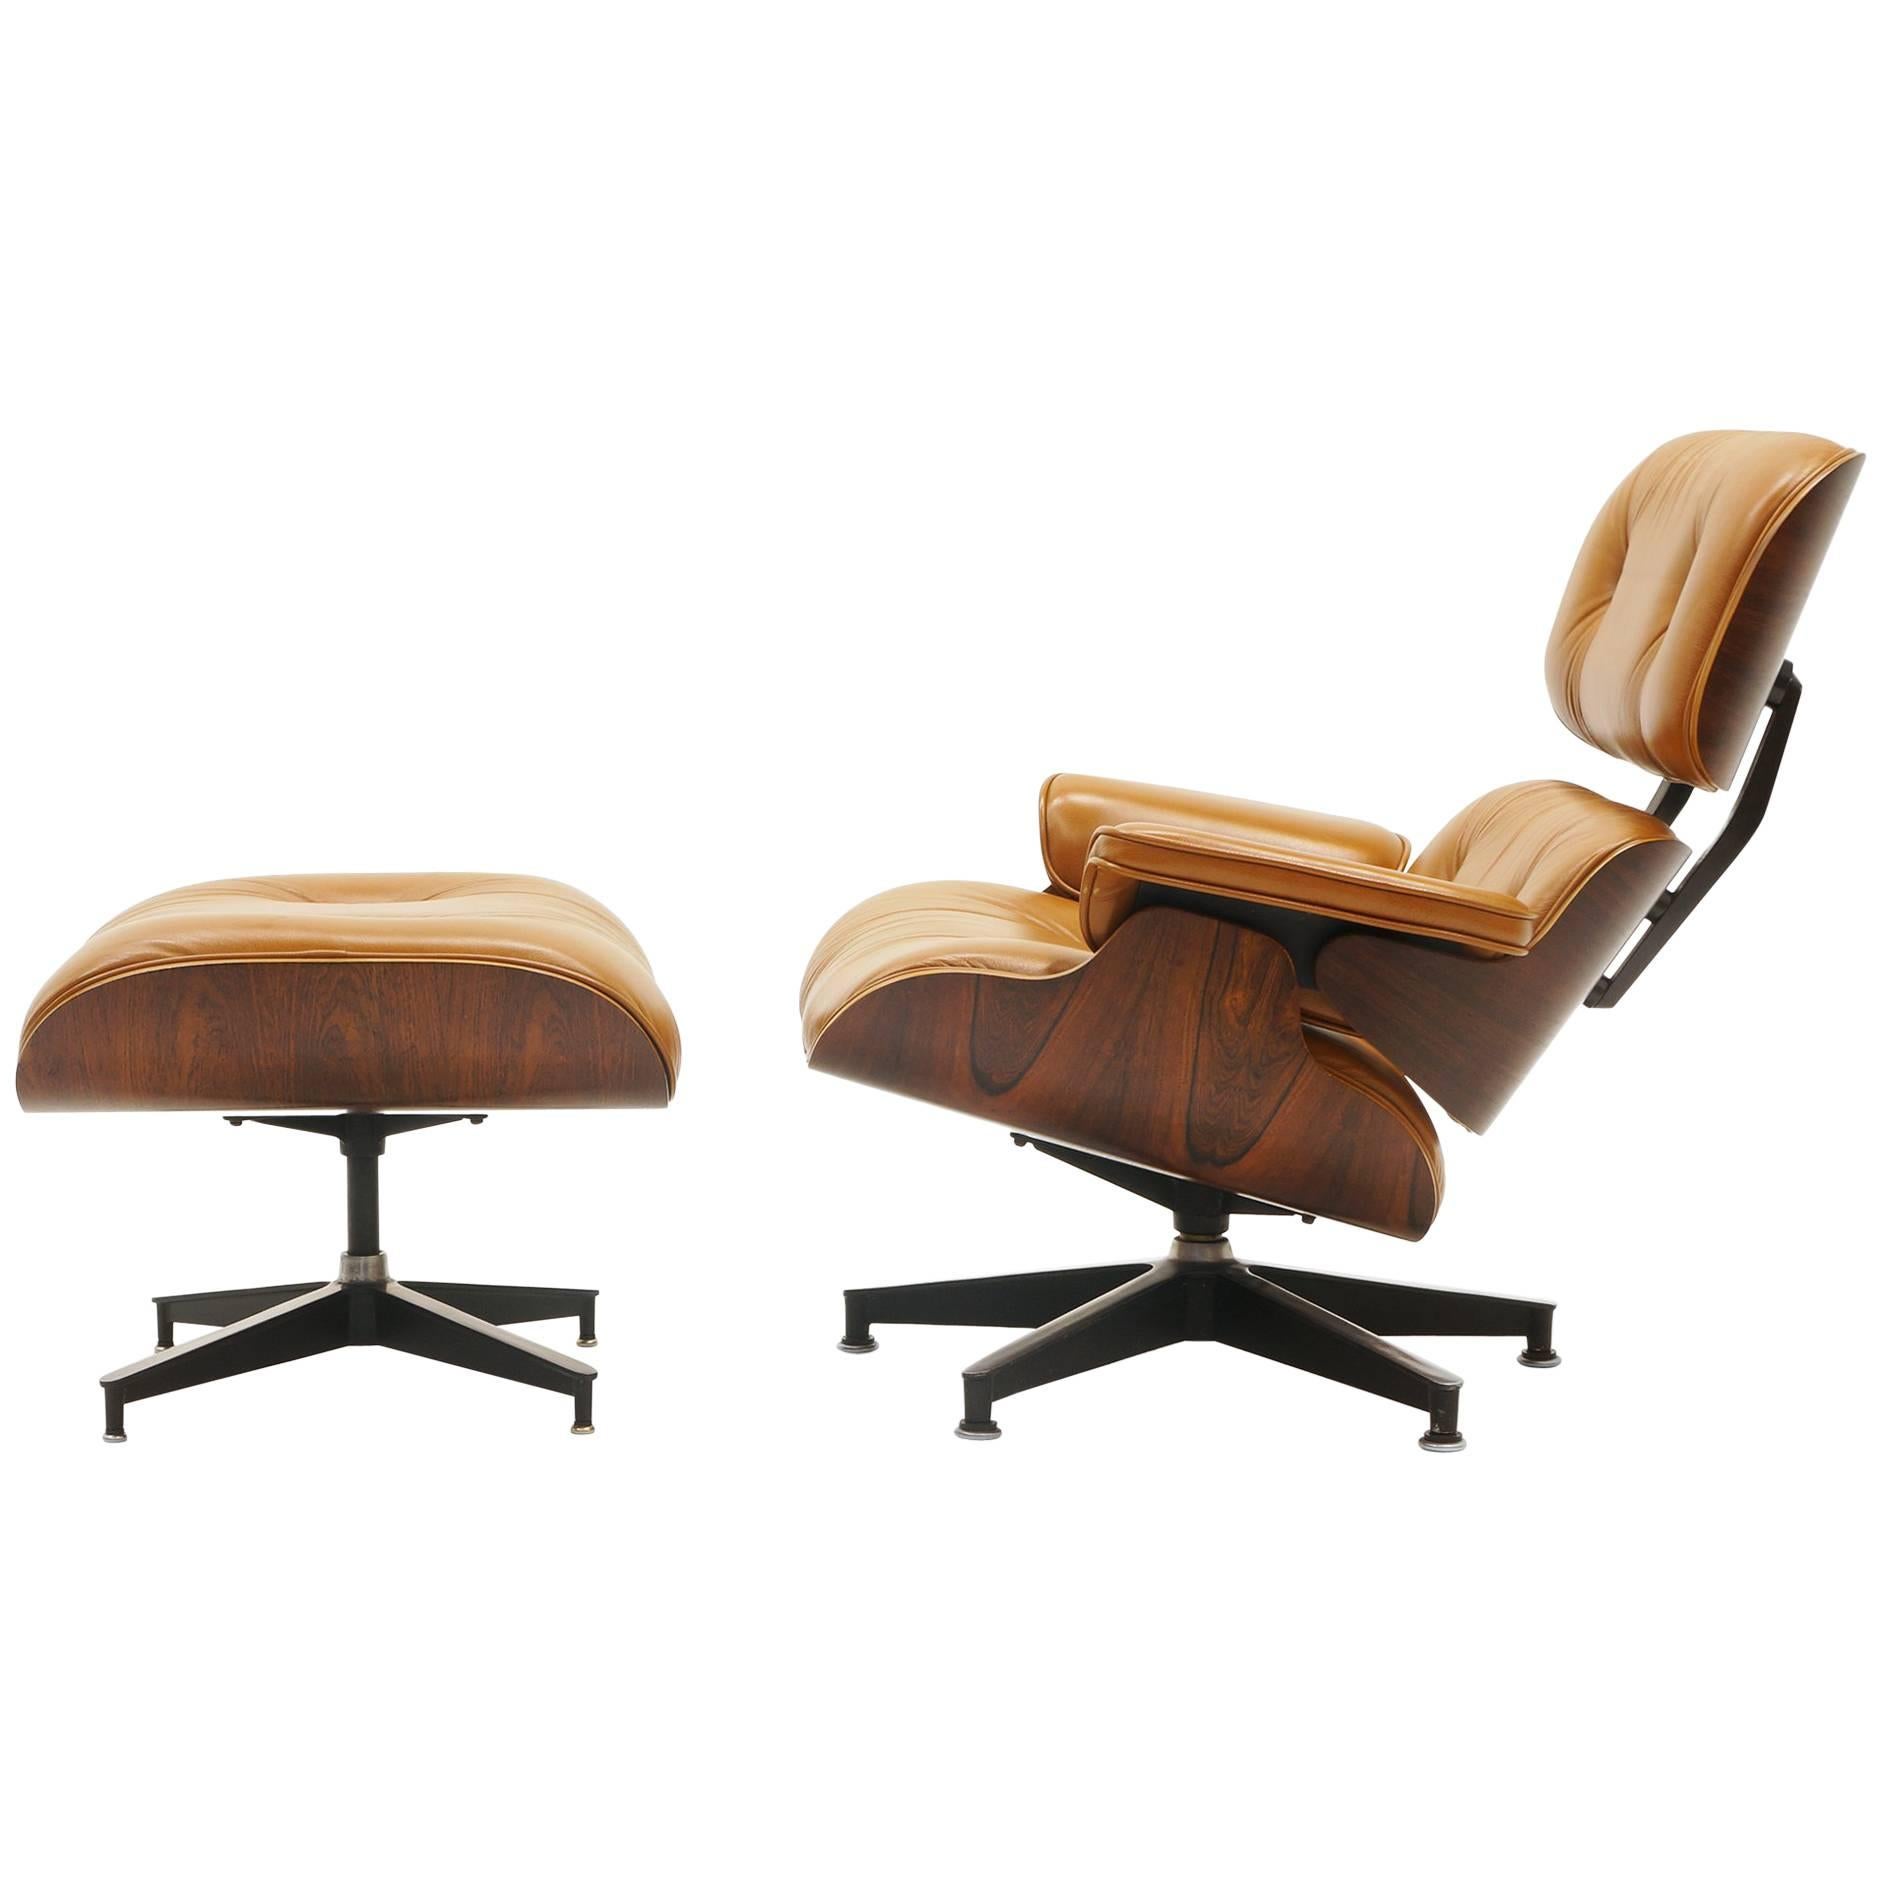 Rare Eames Lounge Chair 670 and Ottoman 671.  Rosewood, Original Cognac Leather.